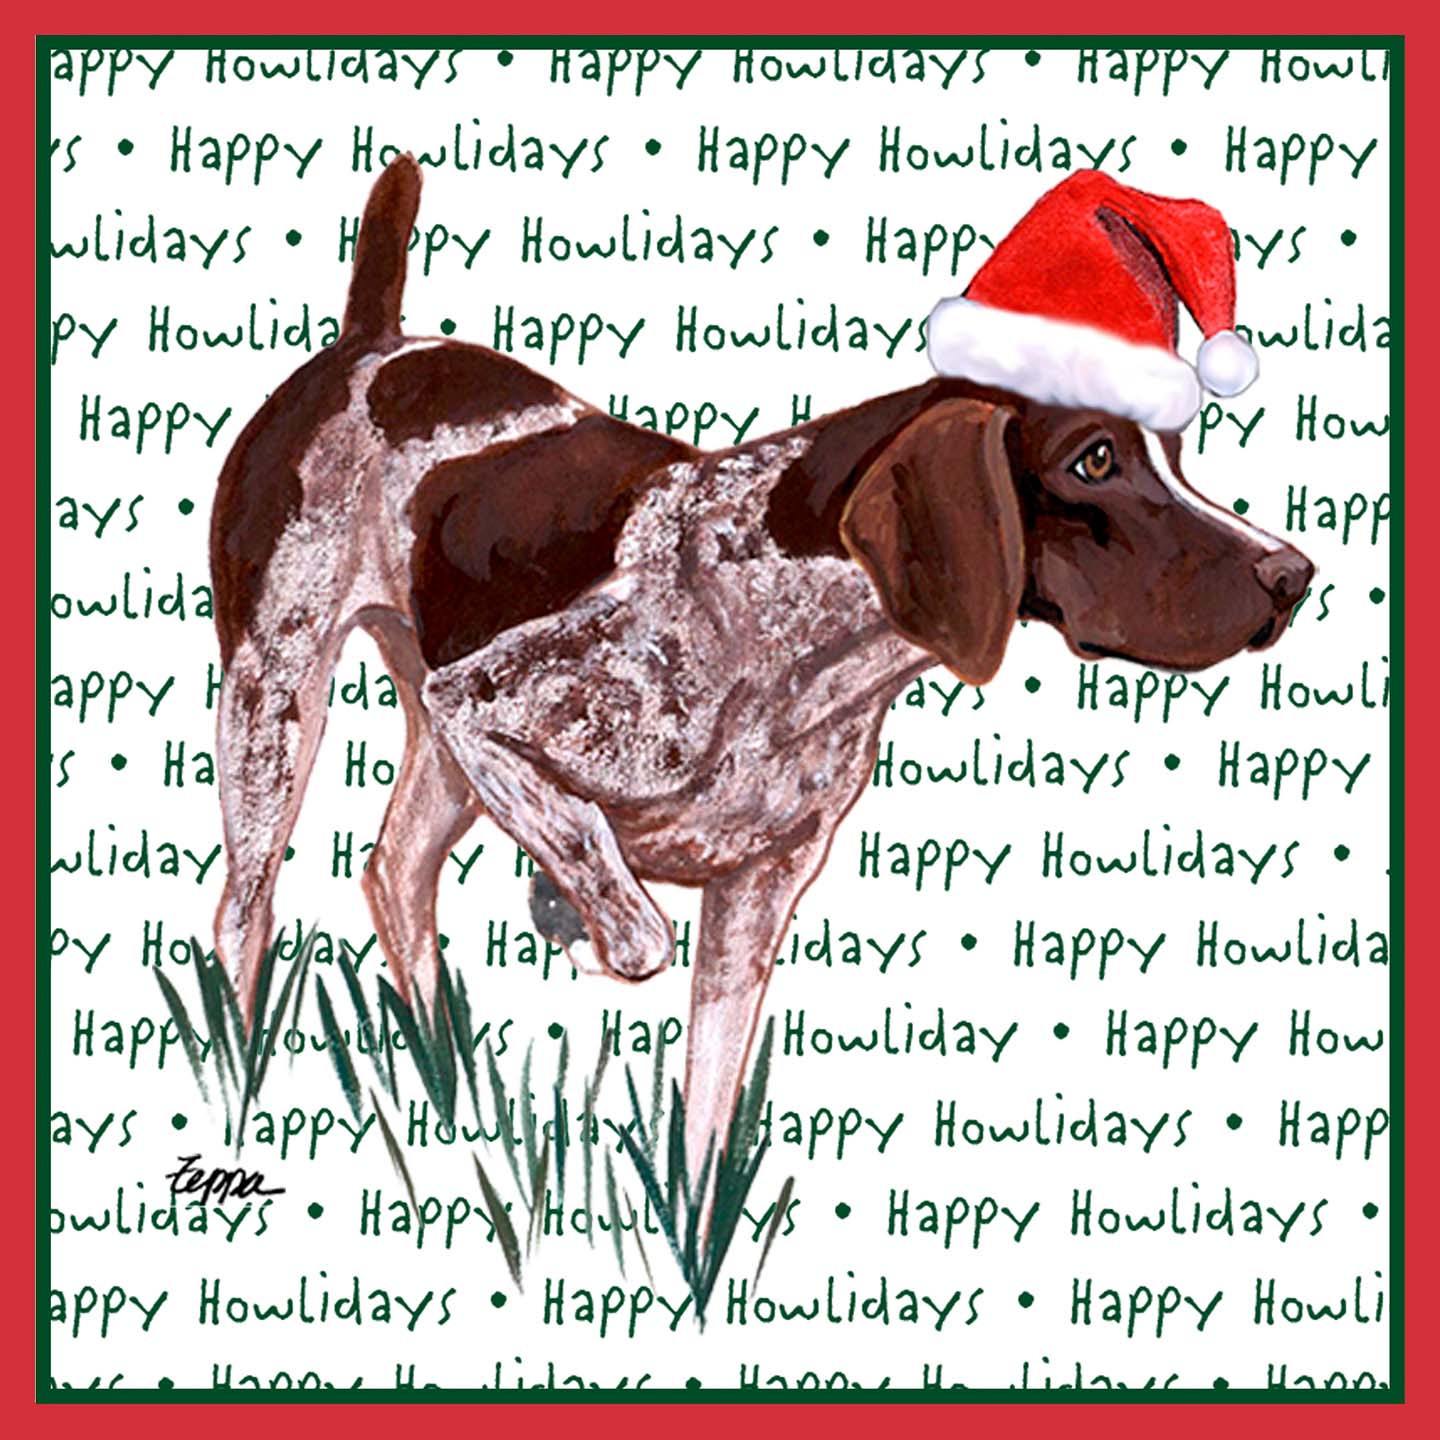 German Shorthaired Pointer Happy Howlidays Text - Adult Unisex T-Shirt